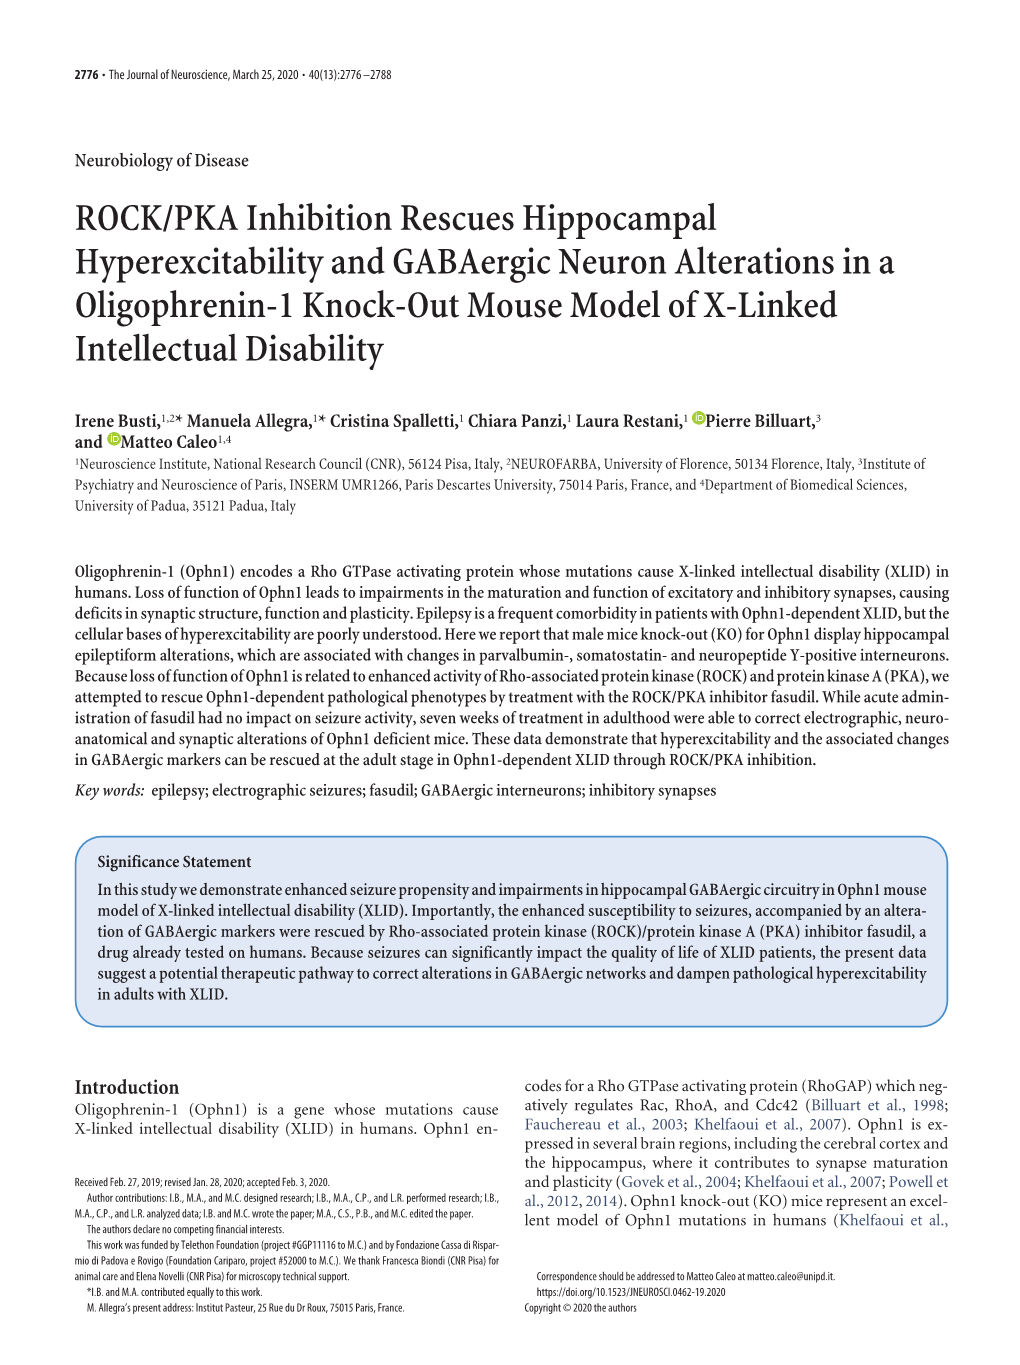 ROCK/PKA Inhibition Rescues Hippocampal Hyperexcitability And